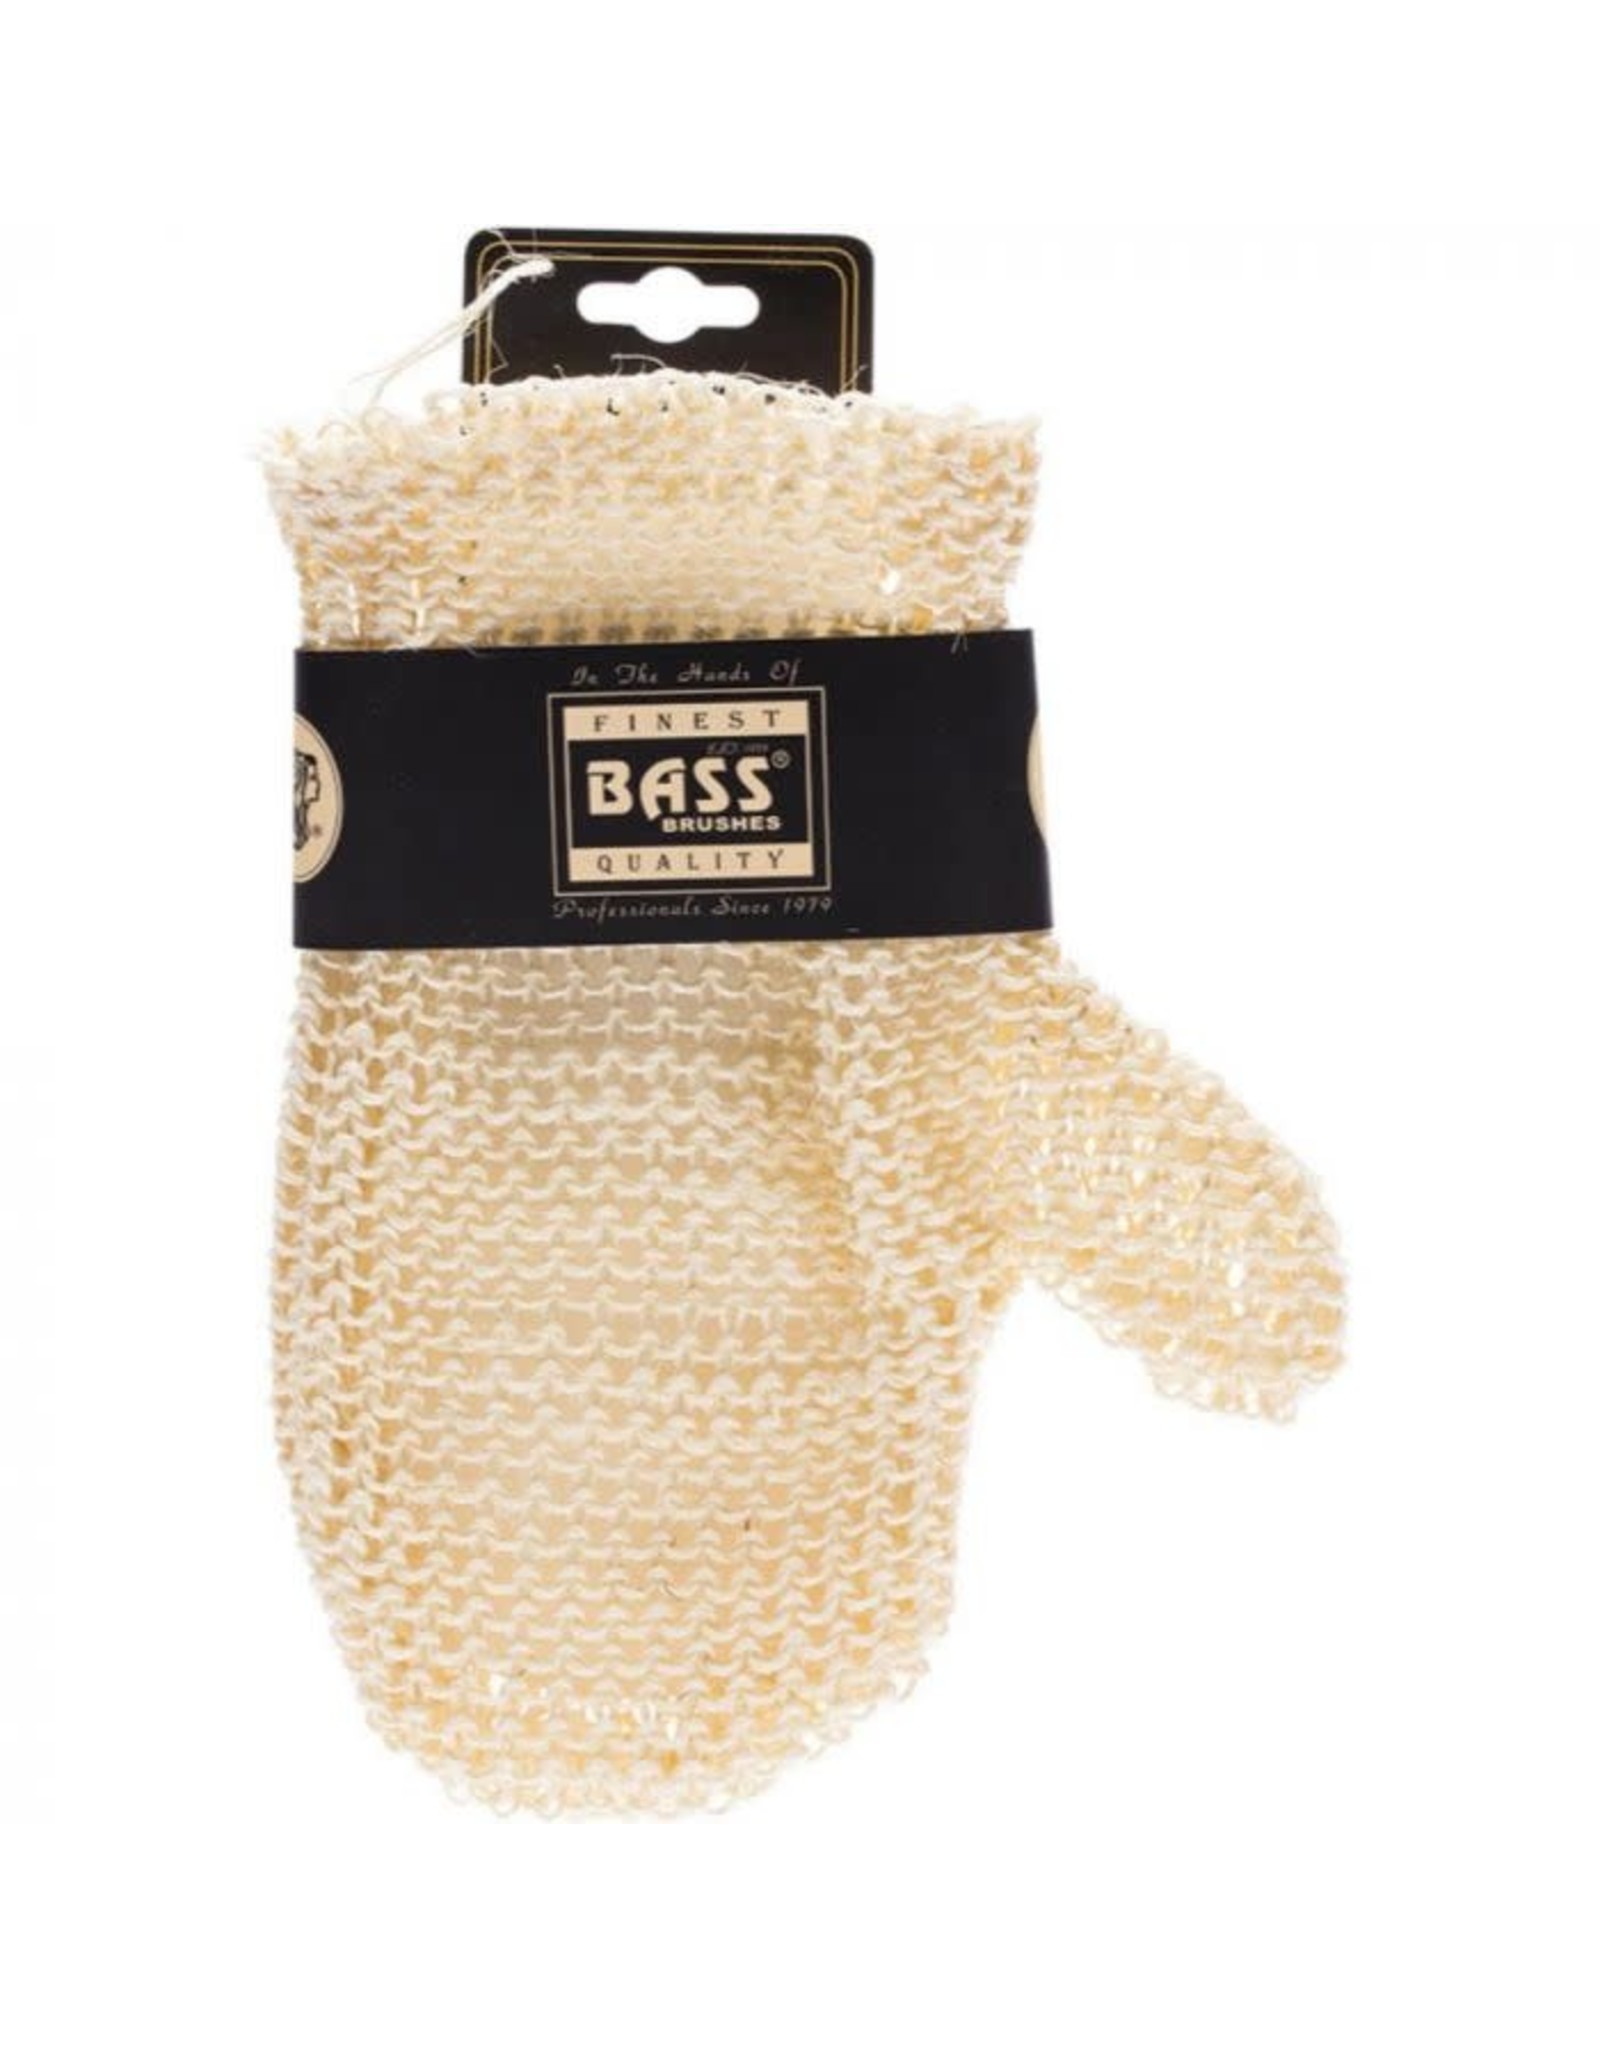 Bass Brushes Sisal Deluxe Hand Glove Knitted Style